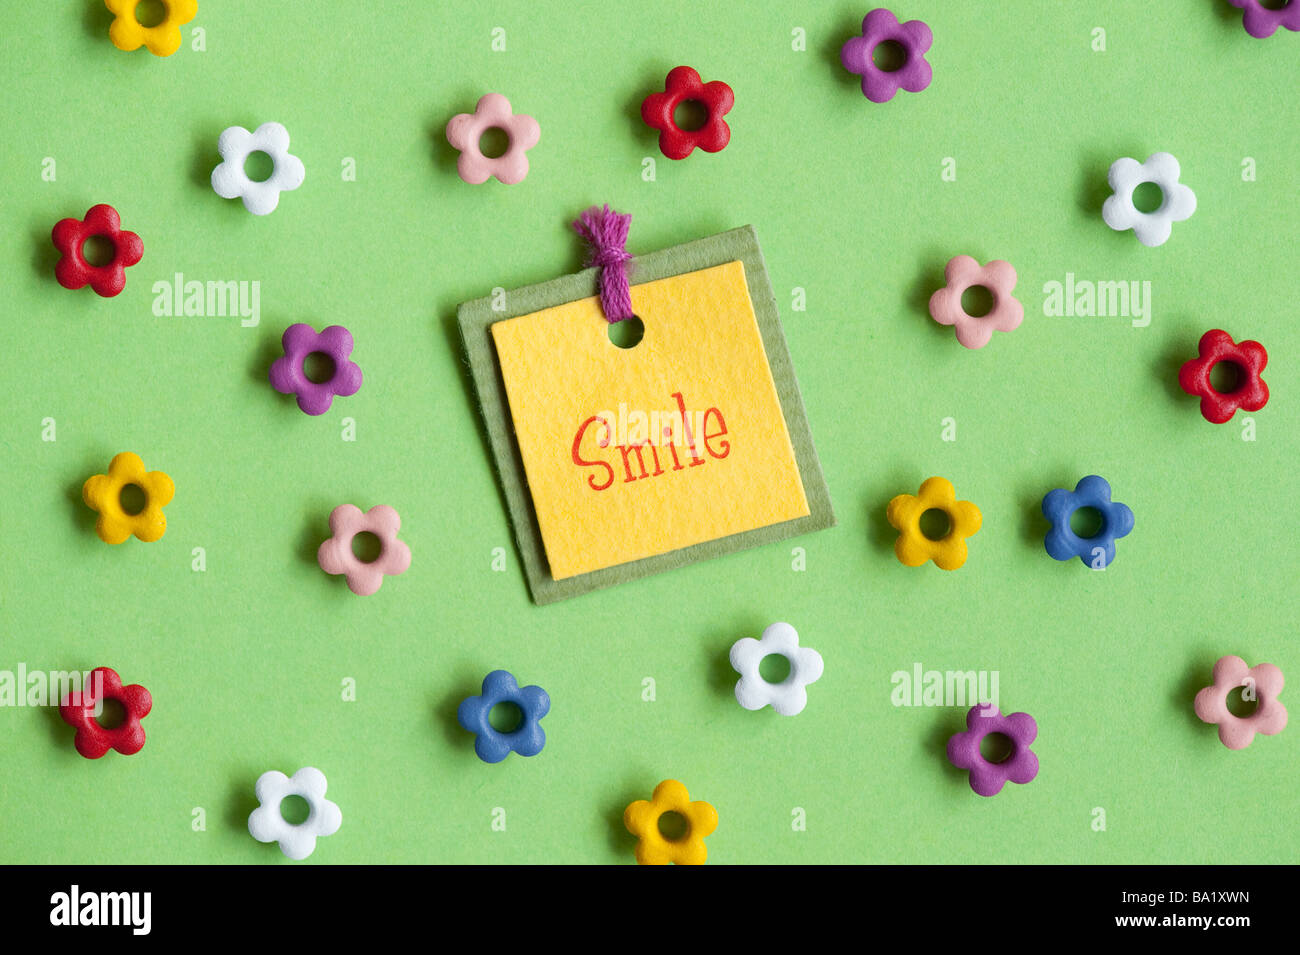 Smile label and flower shapes on green background Stock Photo